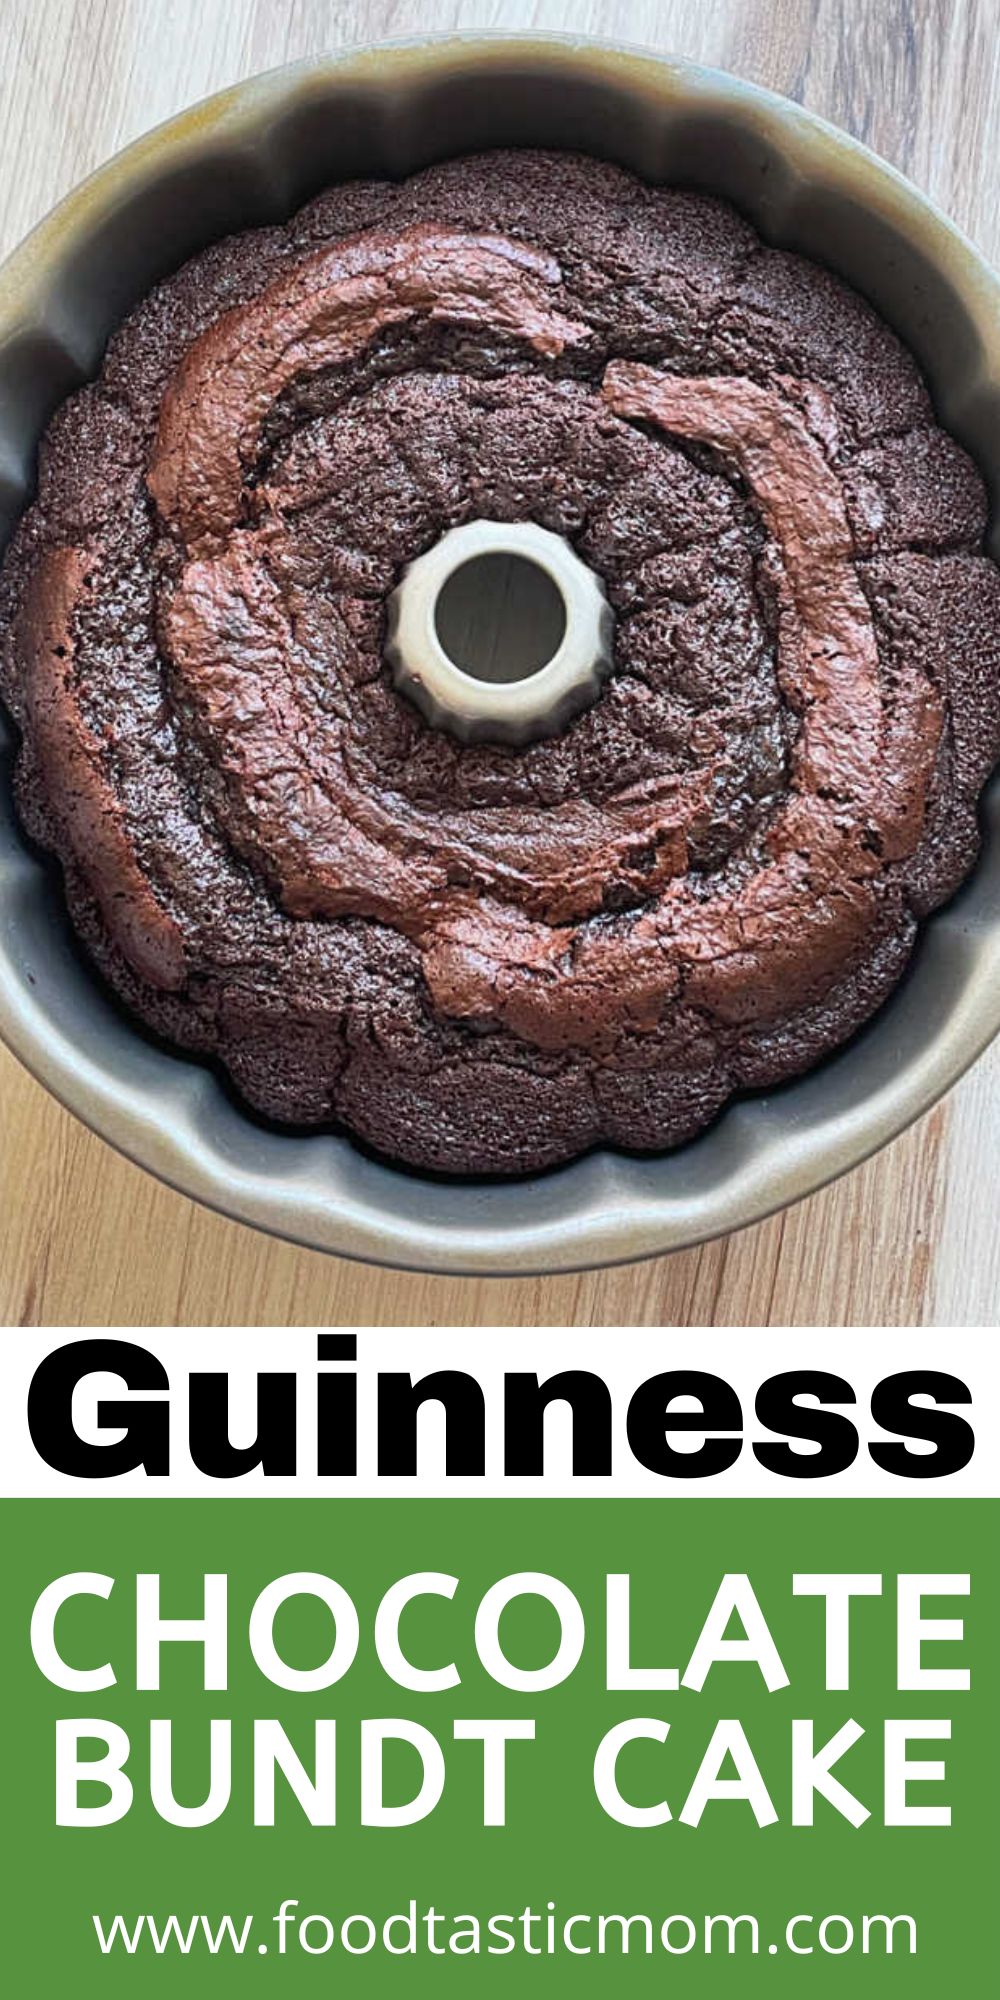 Guinness Chocolate Bundt Cake is a very simple cake made super moist thanks to the full cup of Guinness beer in the batter. via @foodtasticmom